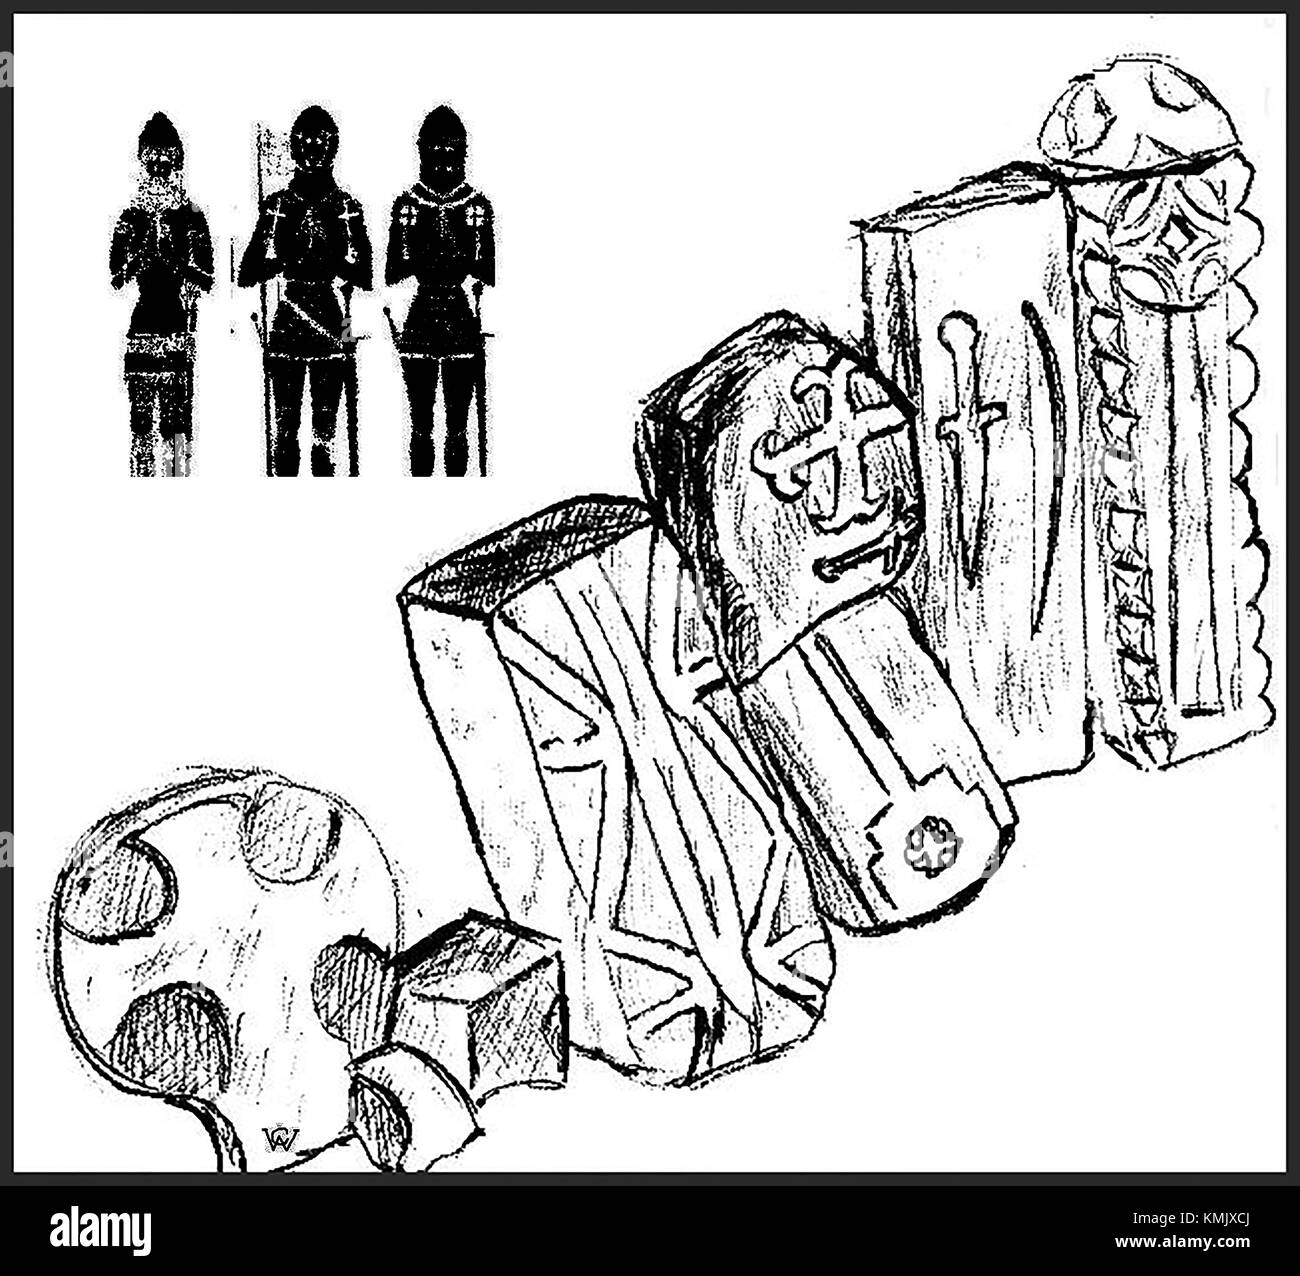 A sketch of ancient   knights Knights Templar grave markers and fragments in the porchway of Christ Church, Westerdale village , North Yorkshire, UK once a centre of Templar activity. Stock Photo